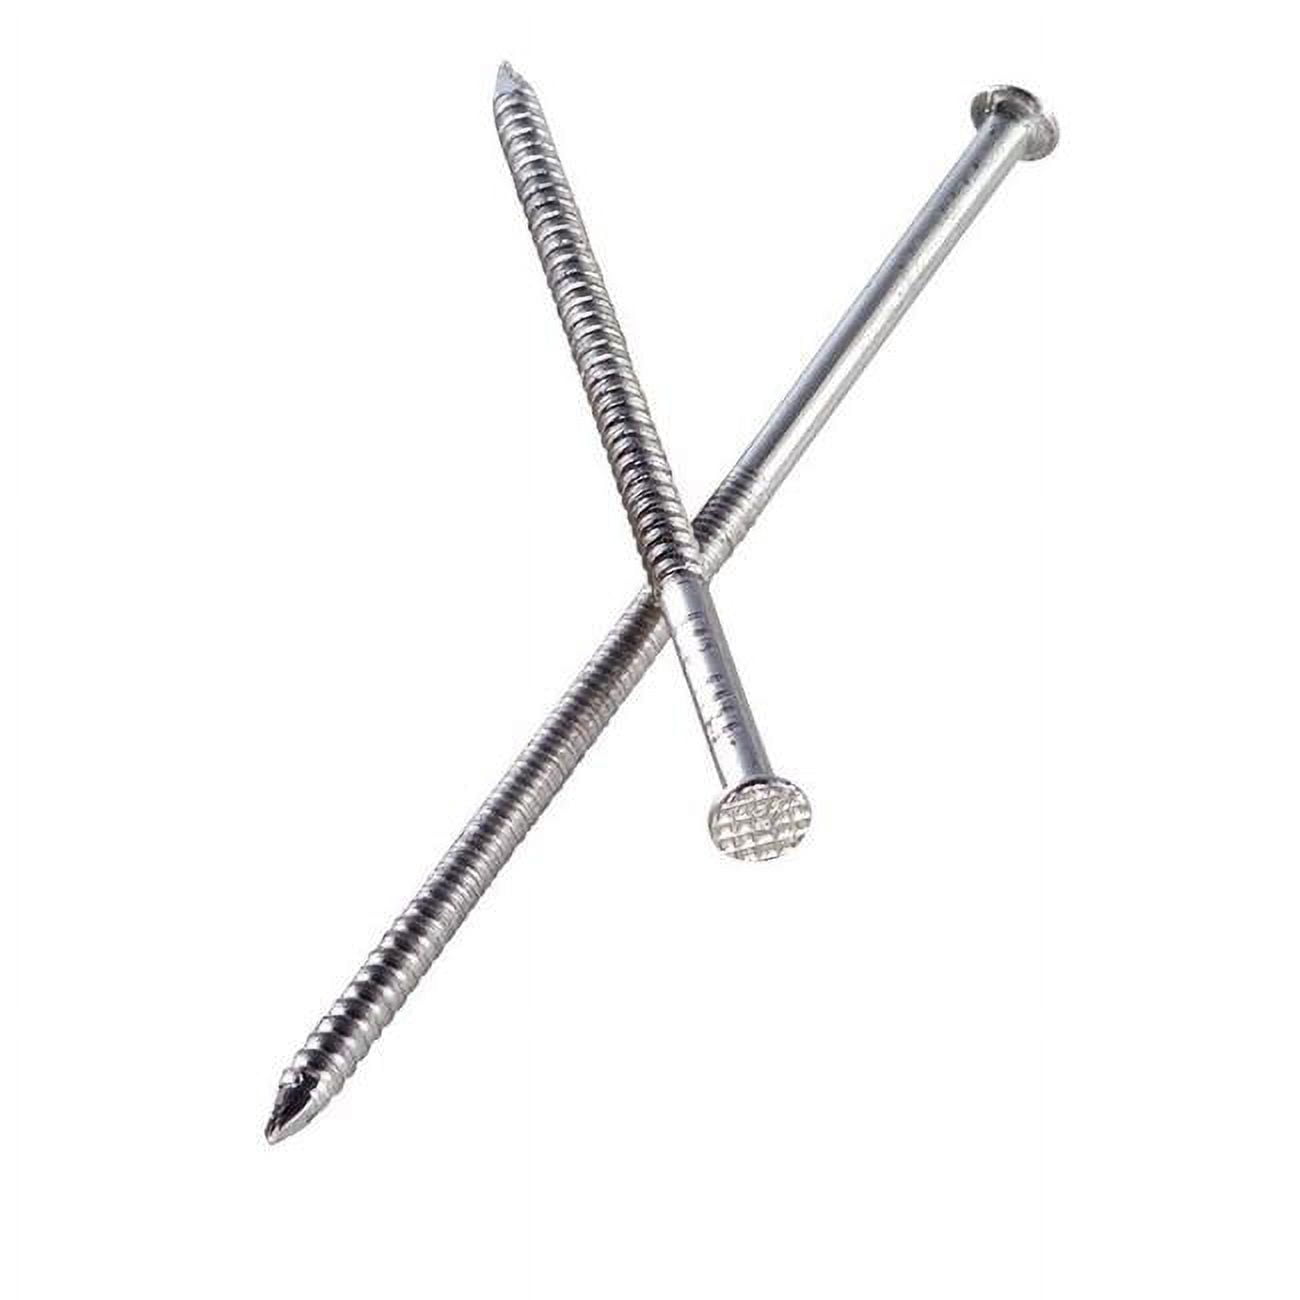 5435144 2d 0.16 In. Siding Stainless Steel Nail With Round Head Annular Ring Shank, Silver - Pack Of 807